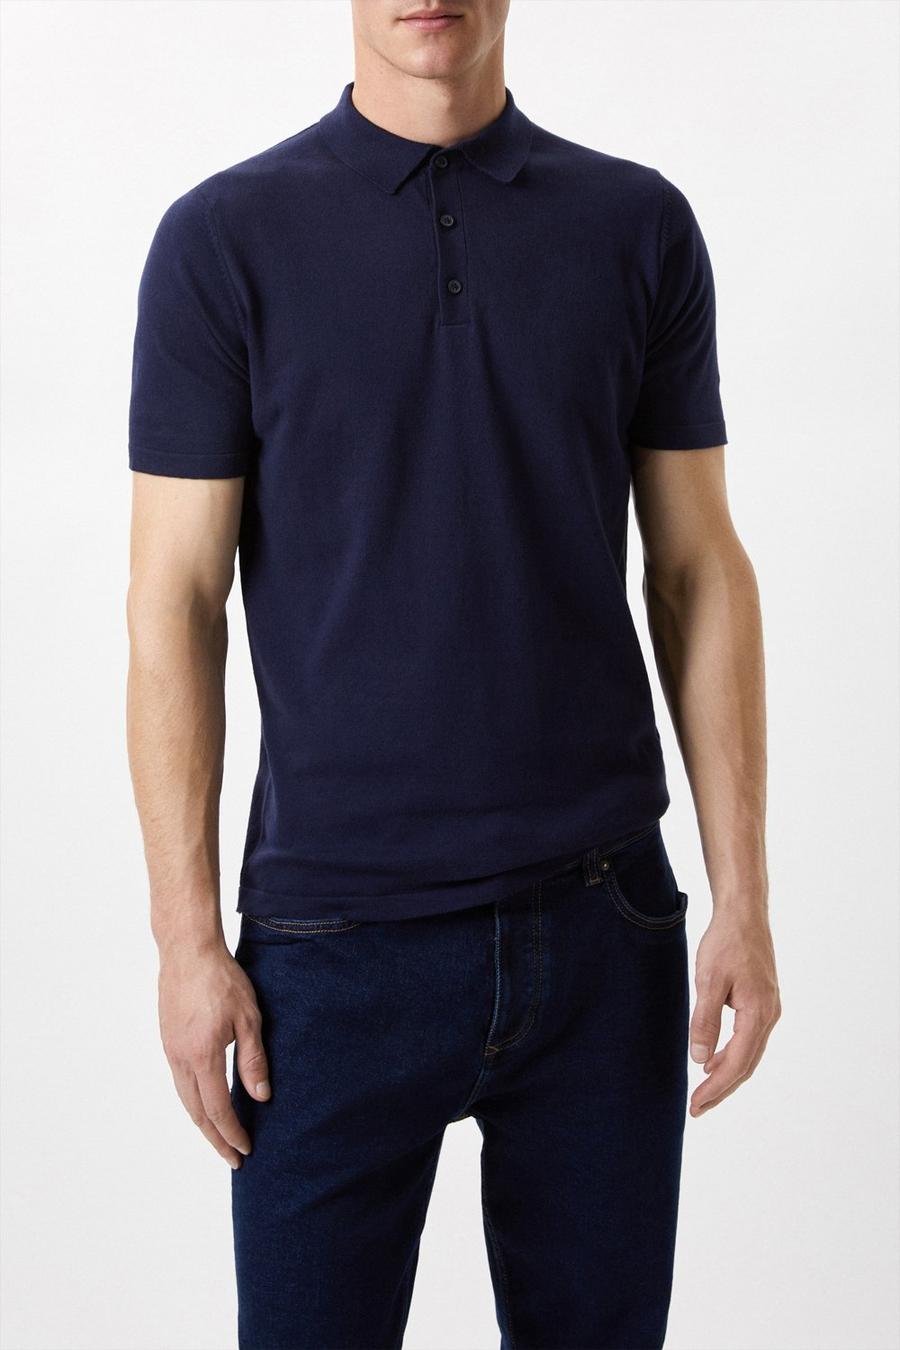 Slim Fit Navy Short Sleeve Modern Knitted Polo